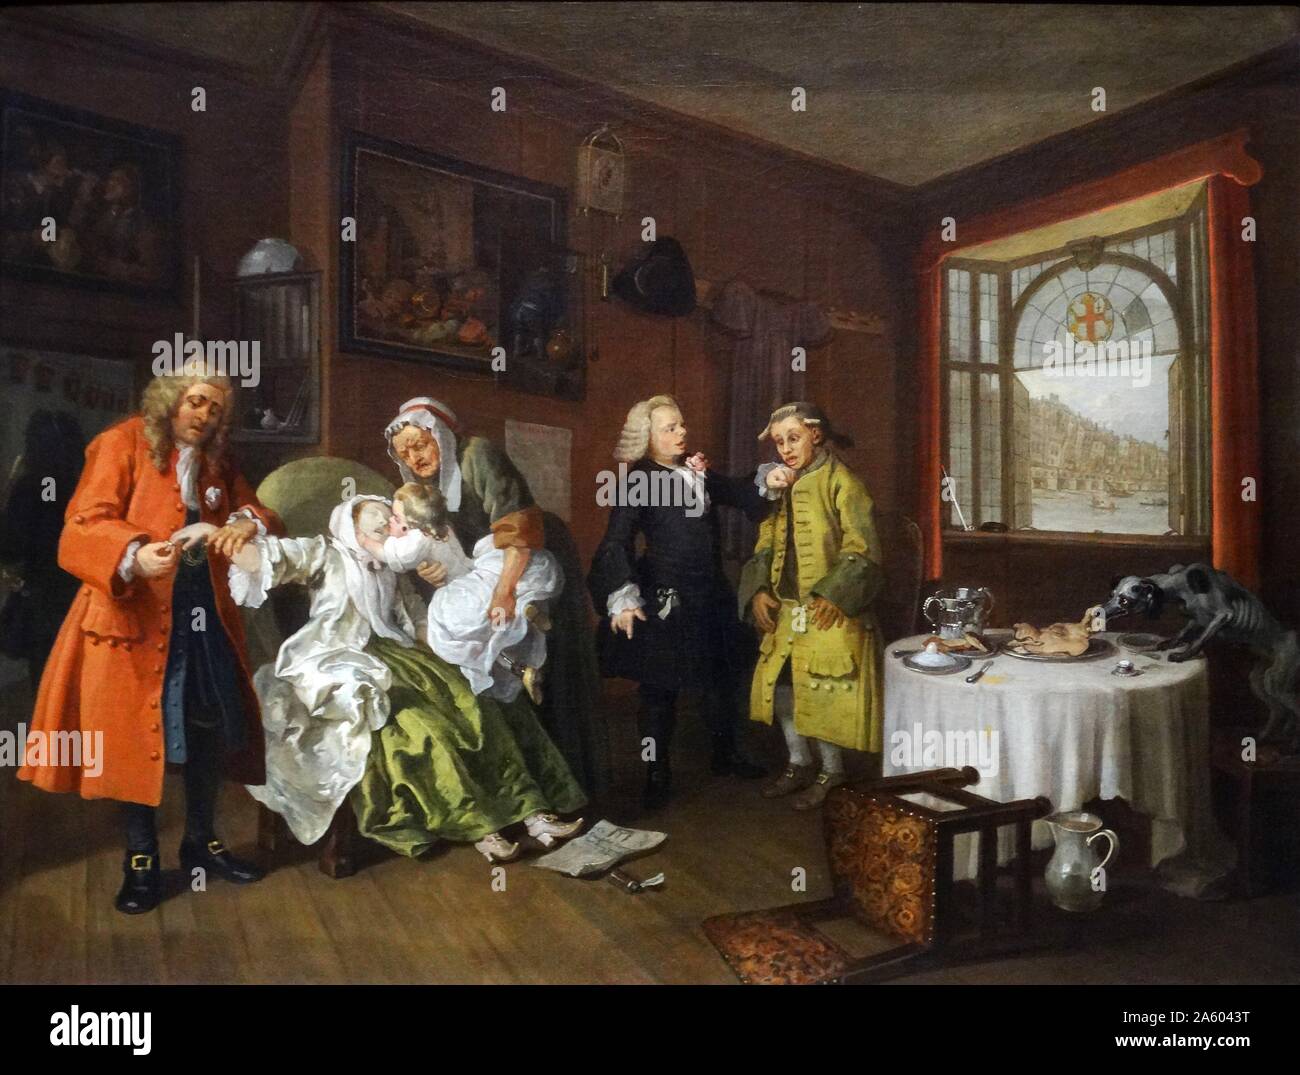 Painting titled 'Marriage à-la-mode: 6. The Lady's Death' by William Hogarth (1697-1764) an English painter, printmaker, pictorial satirist, social critic, and editorial cartoonist. Dated 18th Century Stock Photo